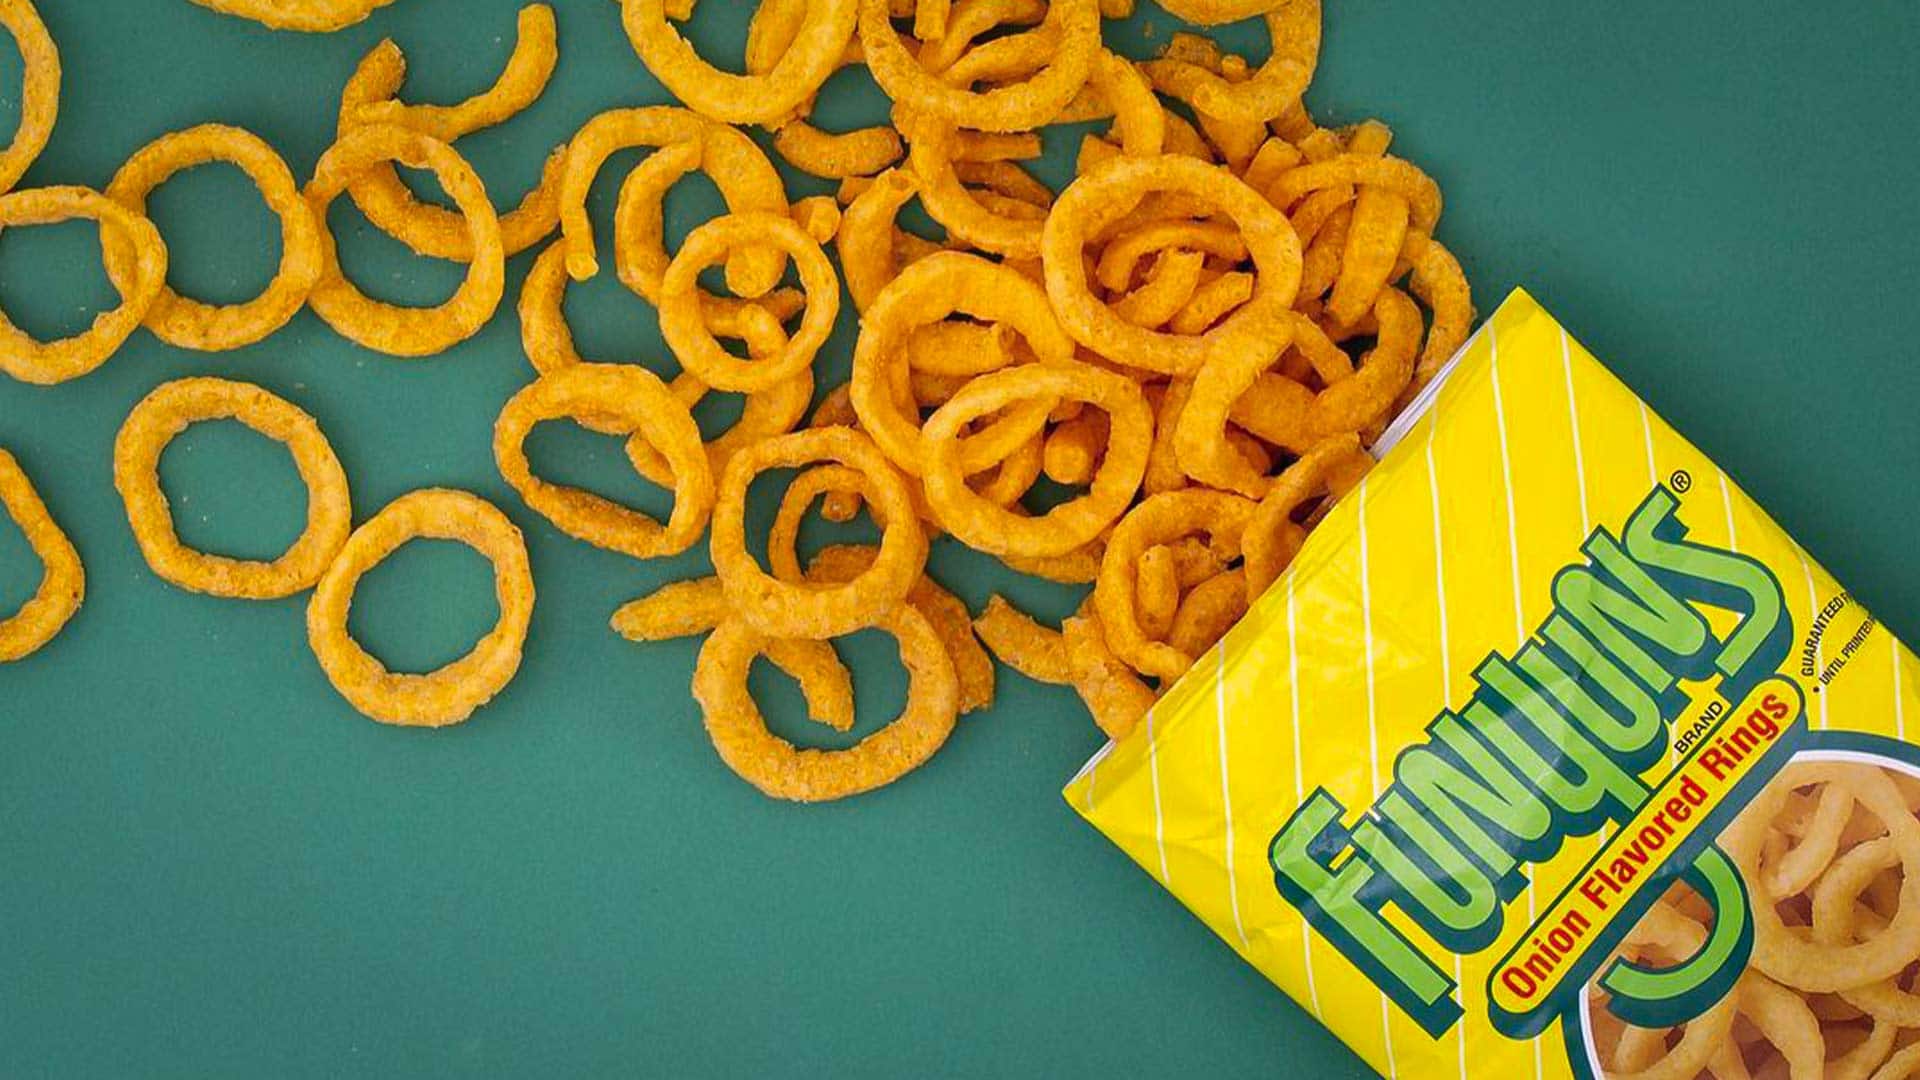 Ingredients Used In Funyuns